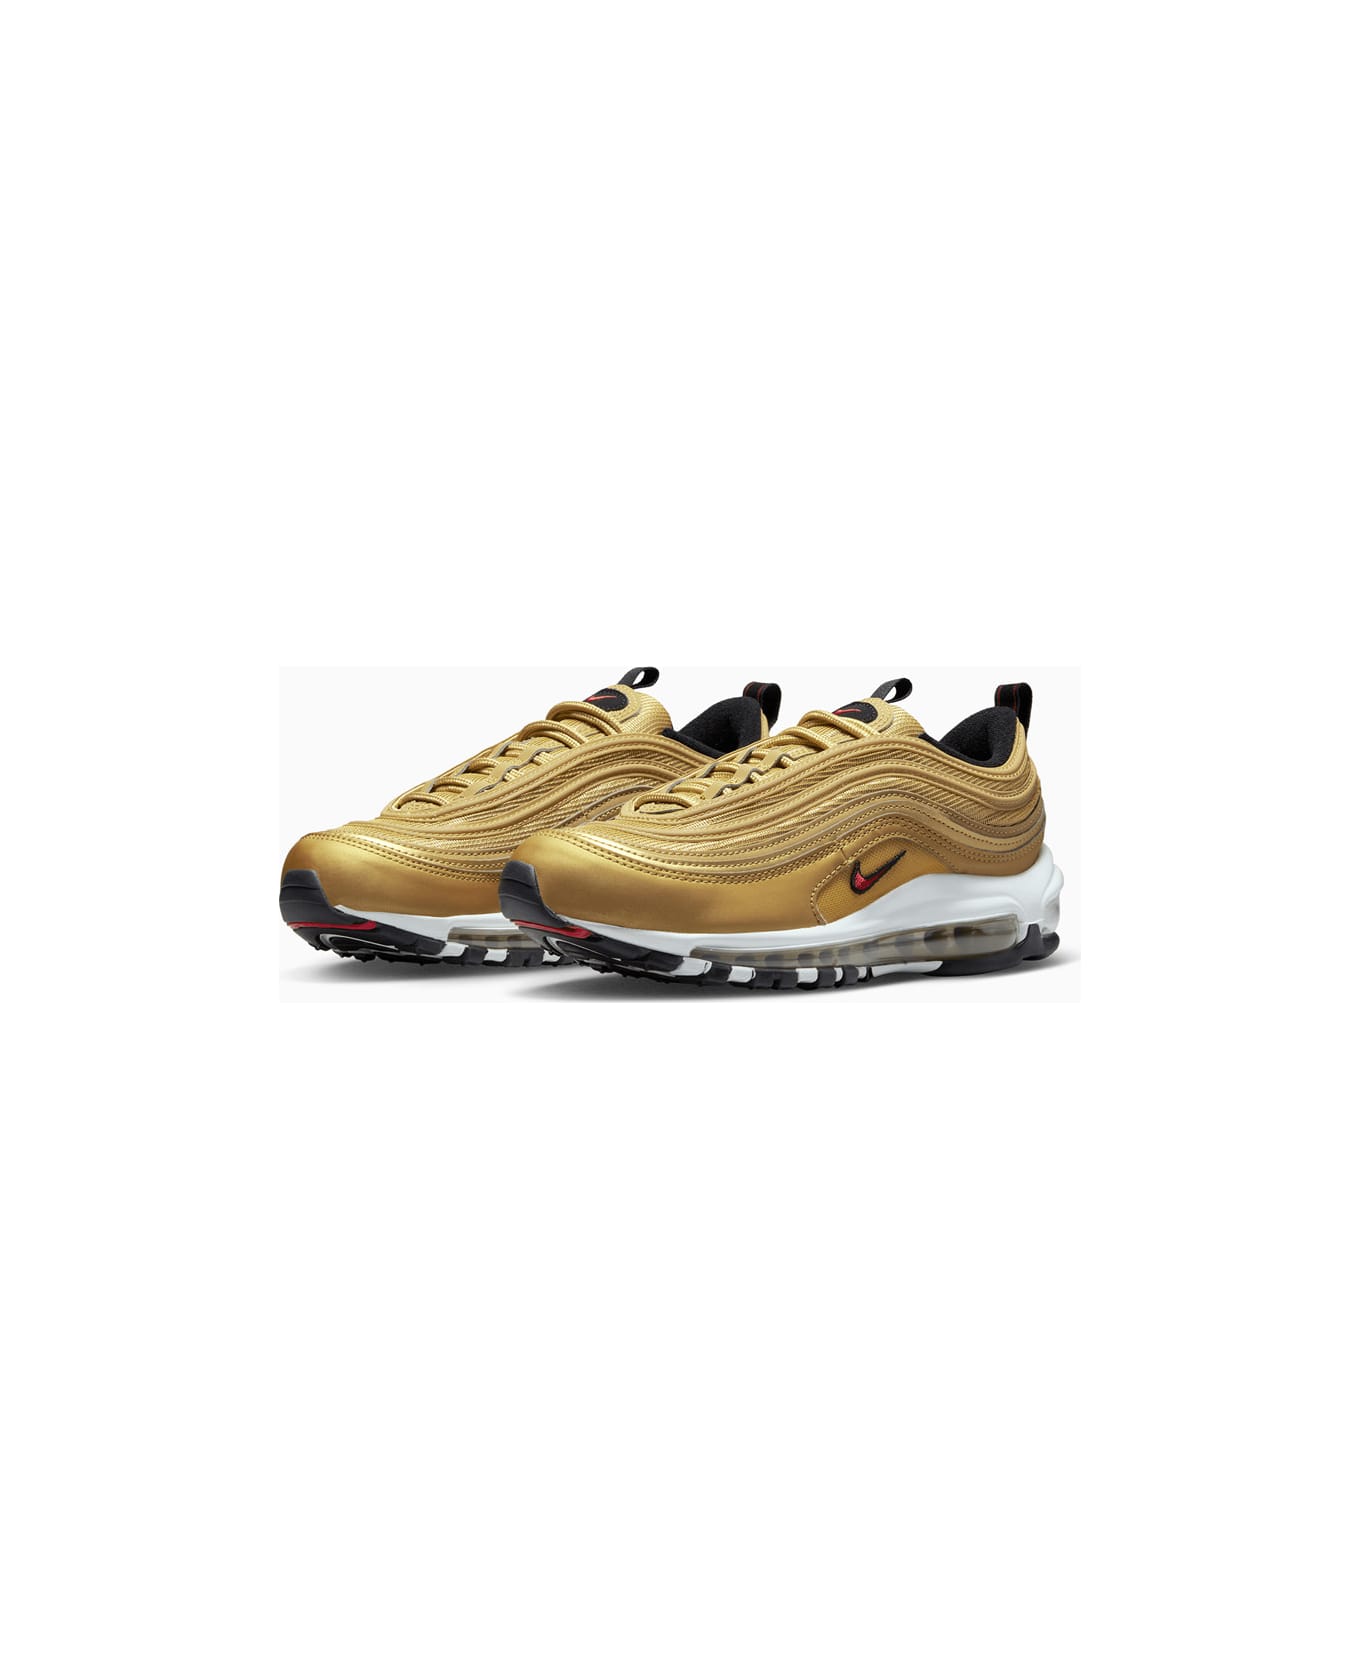 Nike Air Max 97 Og 'gold' Sneakers Dq9131-700 - Gold スニーカー